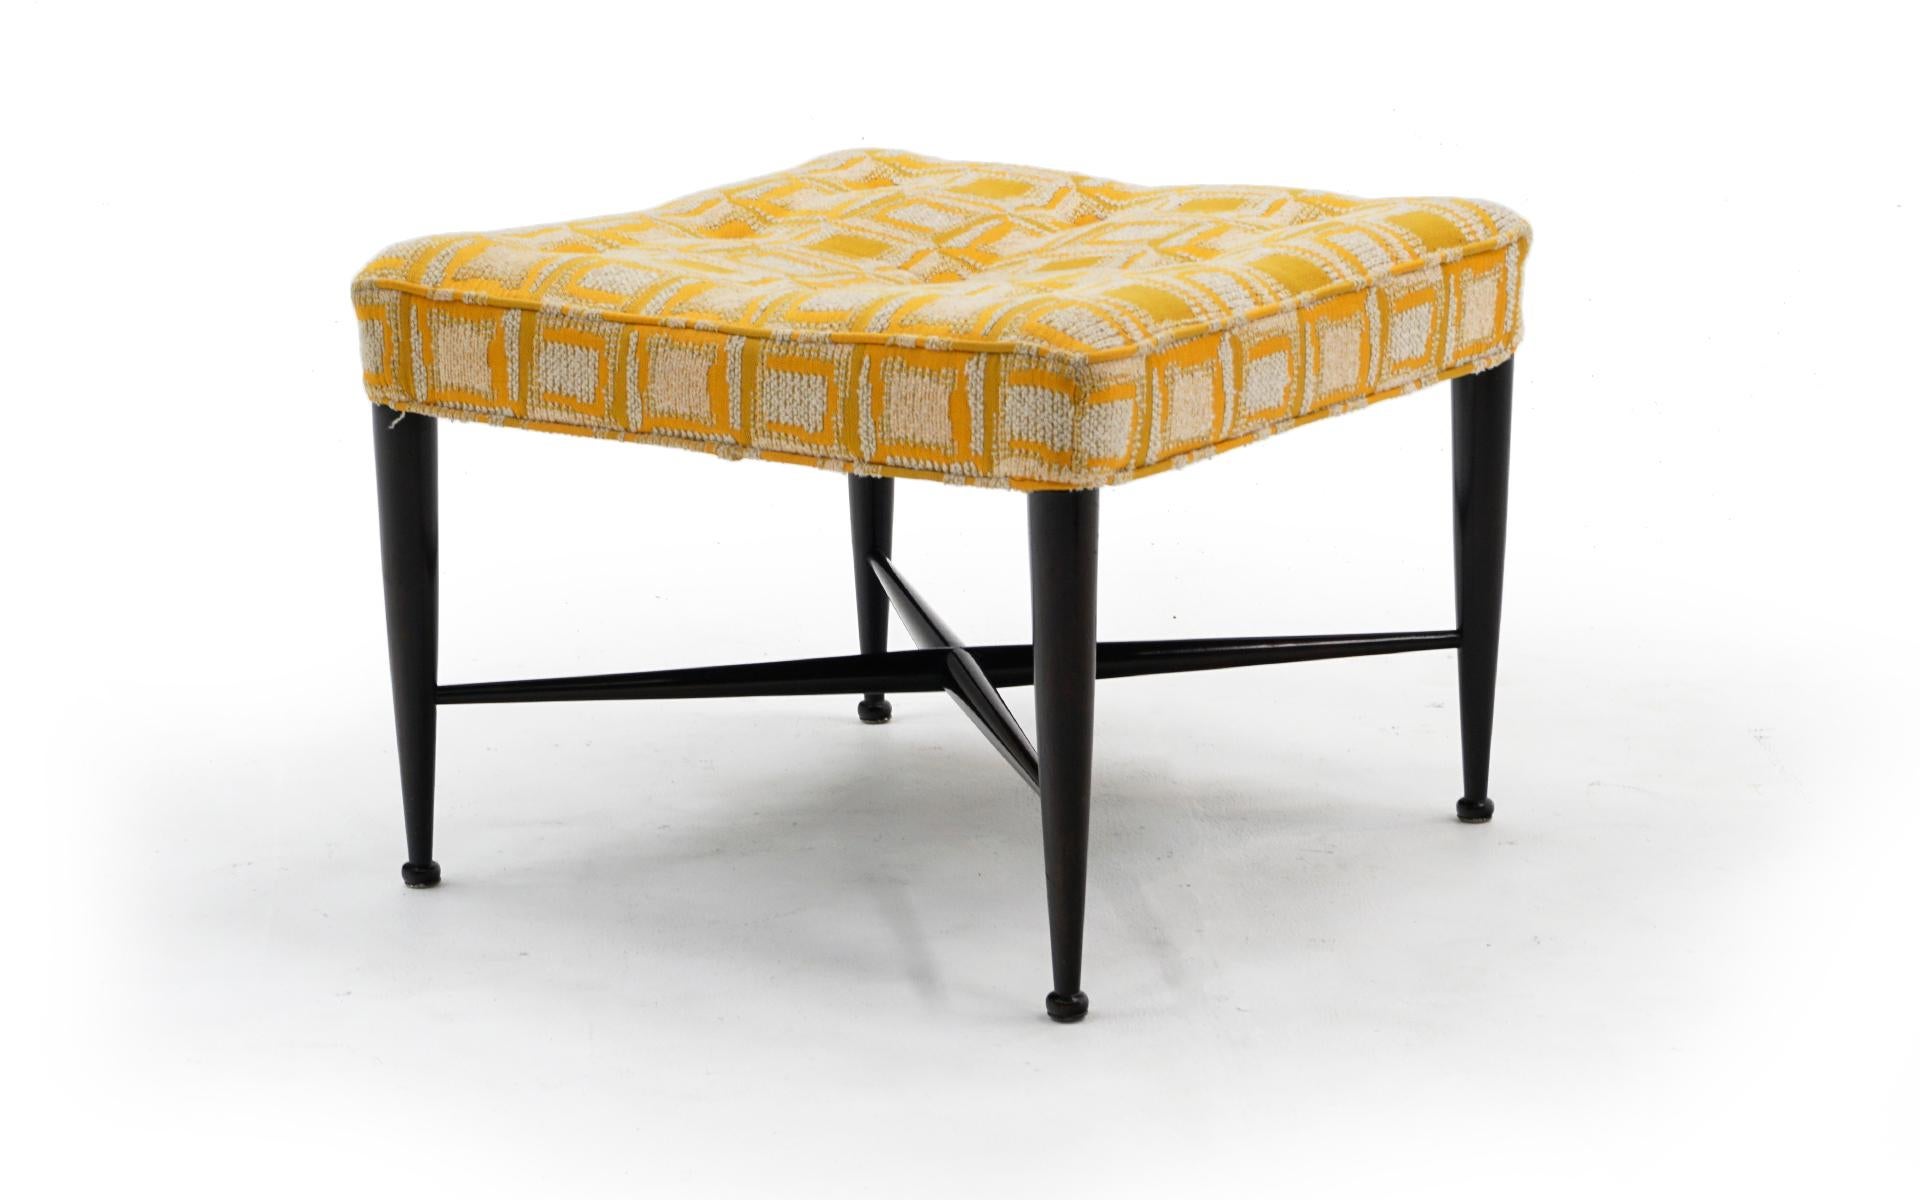 Thebes stool / bench / footrest / footstool designed by Edward Wormley for Dunbar, 1950s. This example retains the original yellow and orange geometric design fabric. The finish on the mahogany frame is original as well. No stains, tears and very